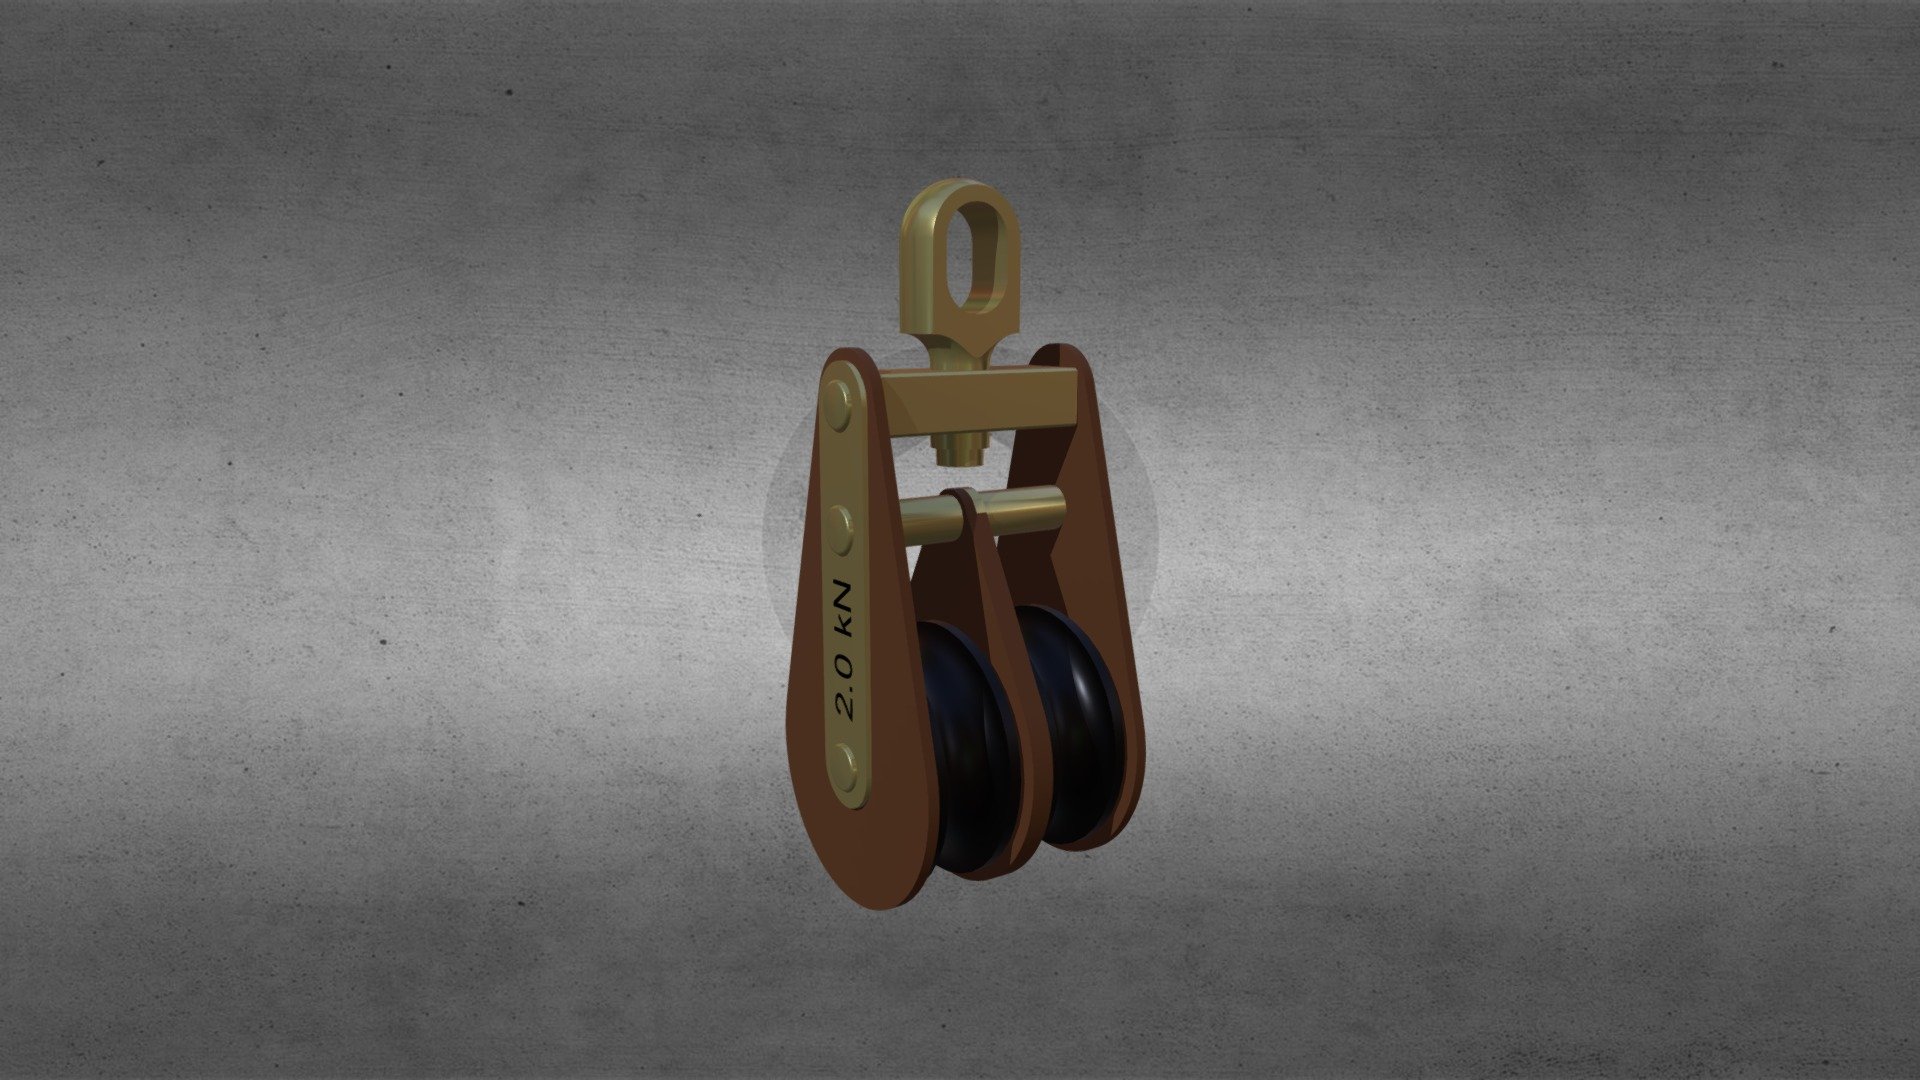 Pulley

a Double version

if you like to buy that, to pull something, there is also Max 2012 file - Double Pulley - 3D model by CADAVeR Kage (@CADAVeRKage) 3d model